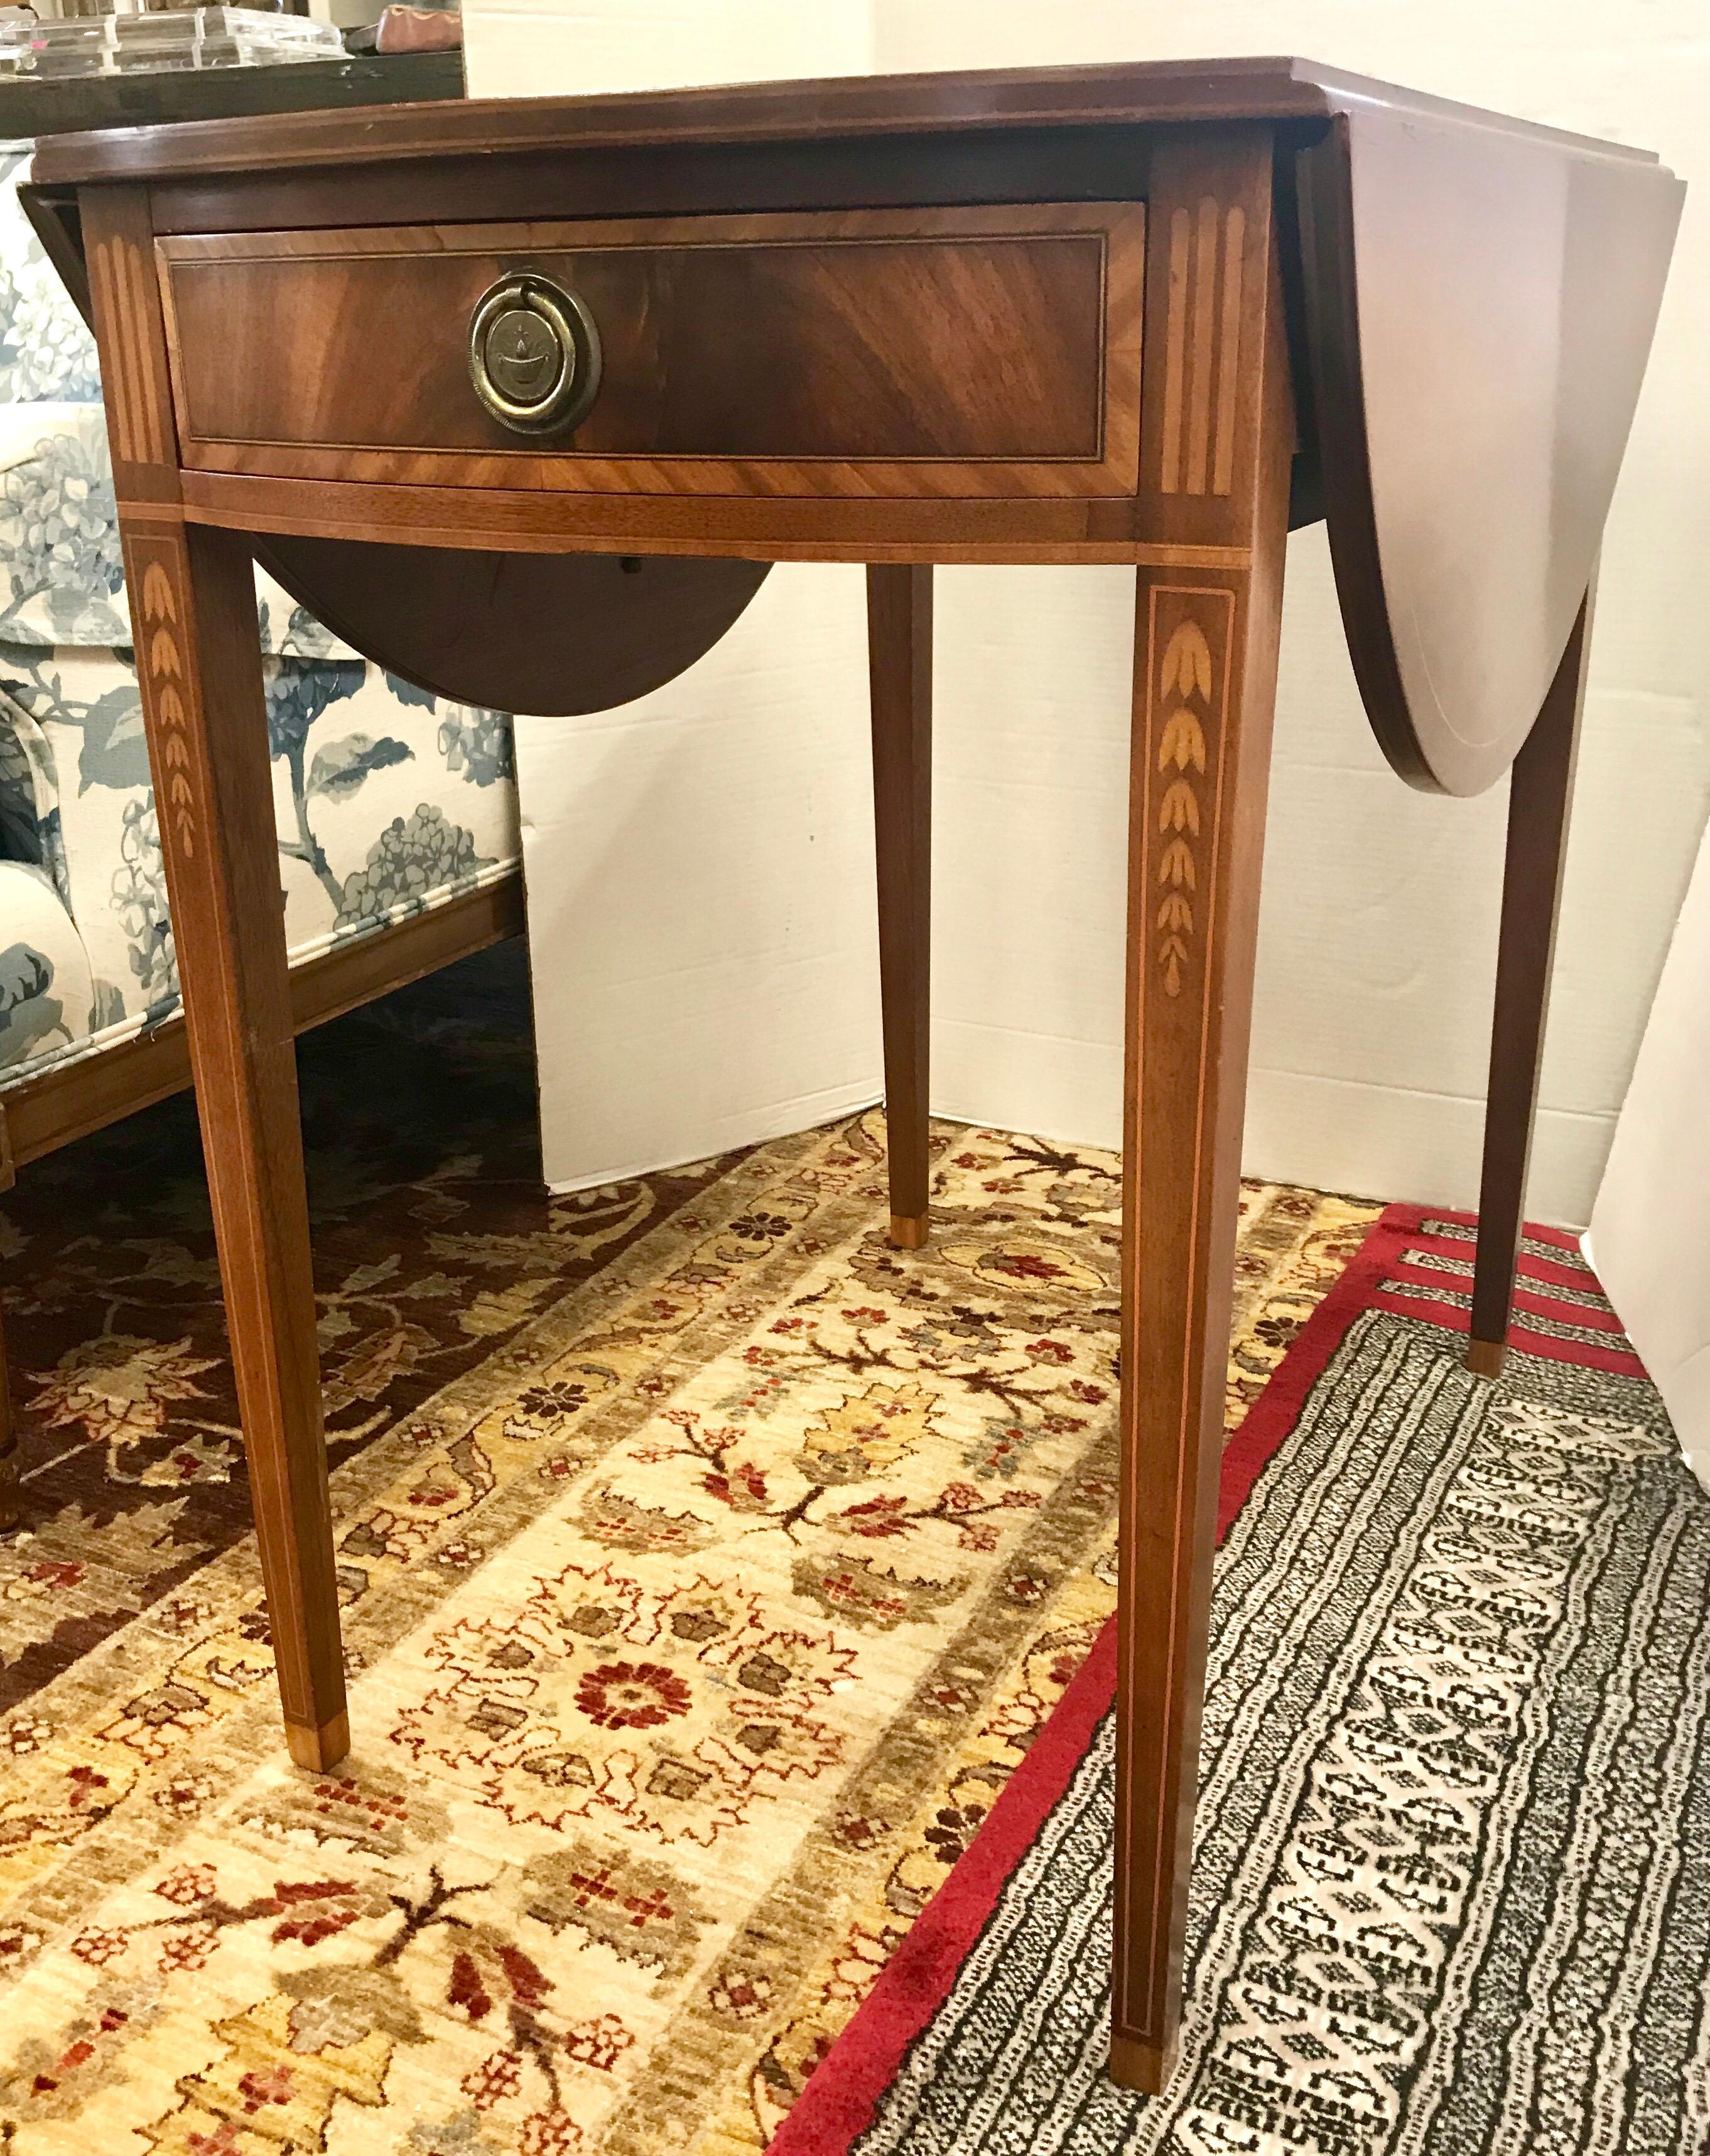 Elegant mahogany occasional table that has fold down leaves and can create game table when leaves are in up position. Inlay runs throughout the piece.